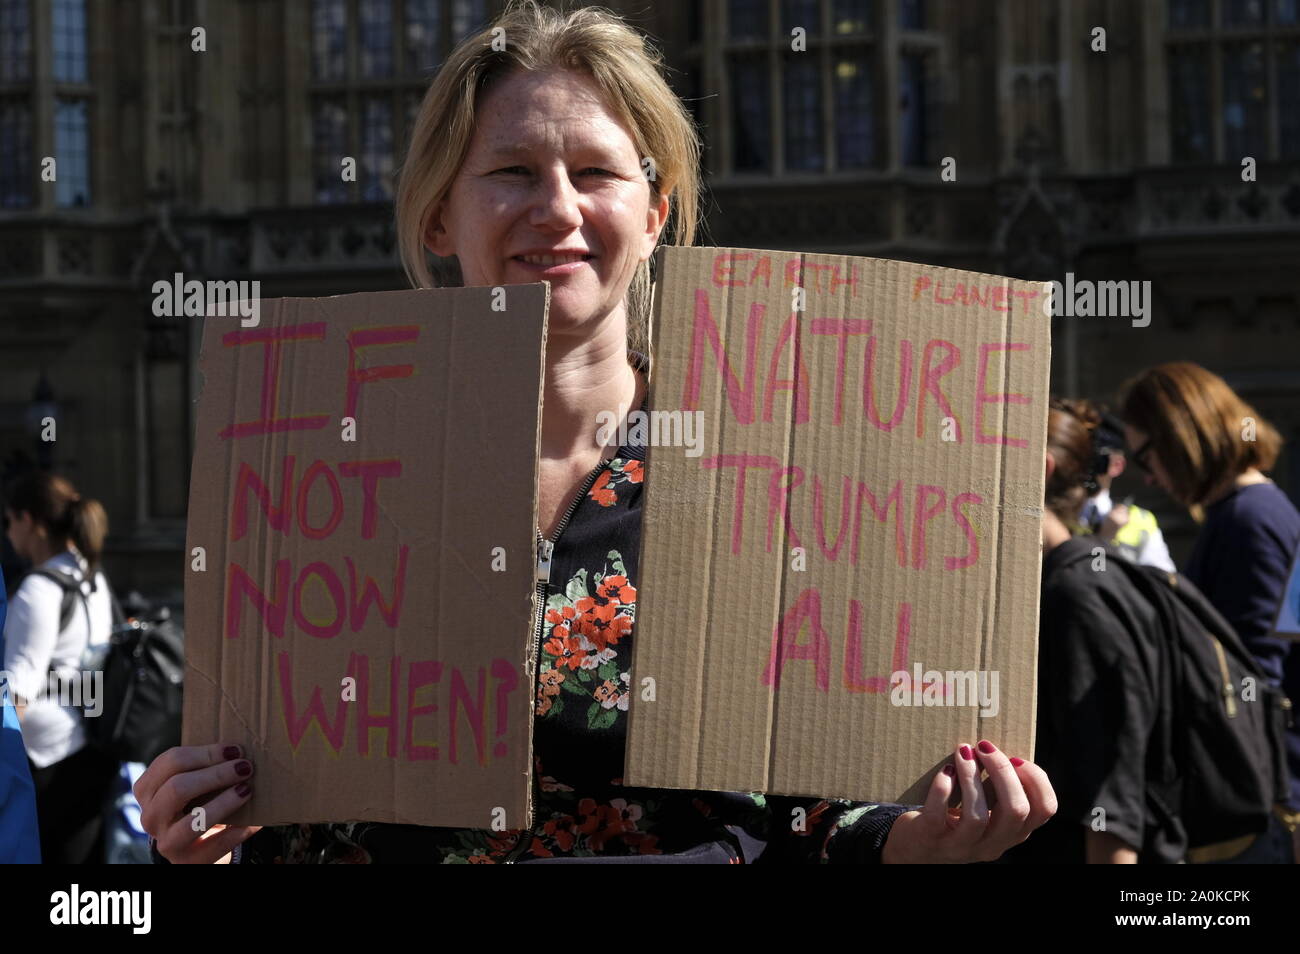 A protester holds placards during the demonstration.Adult and youth walking out of work and schools to demand for an end to the use of fossil fuels and demanding urgent action on climate change to save the planet. Stock Photo